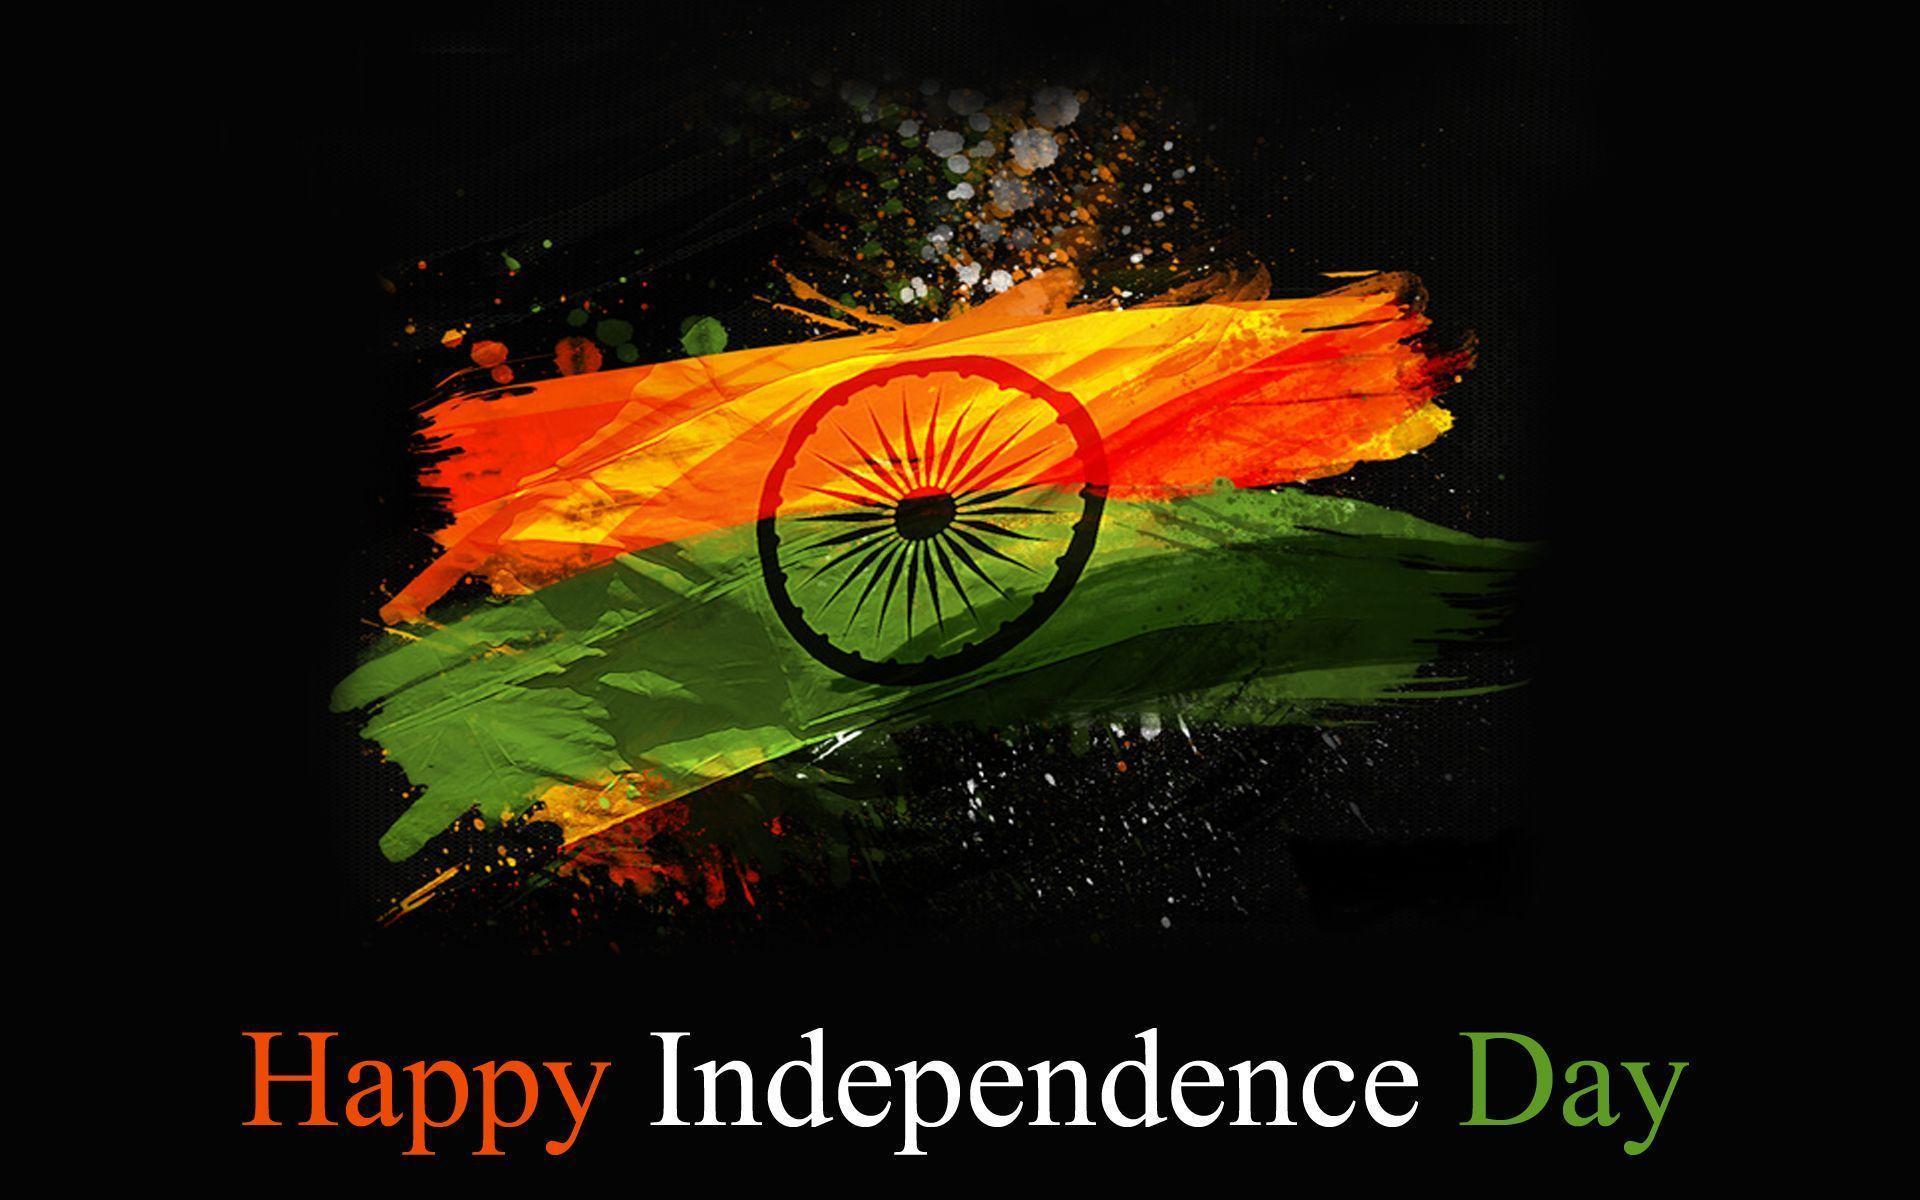 Independence Day download the last version for android